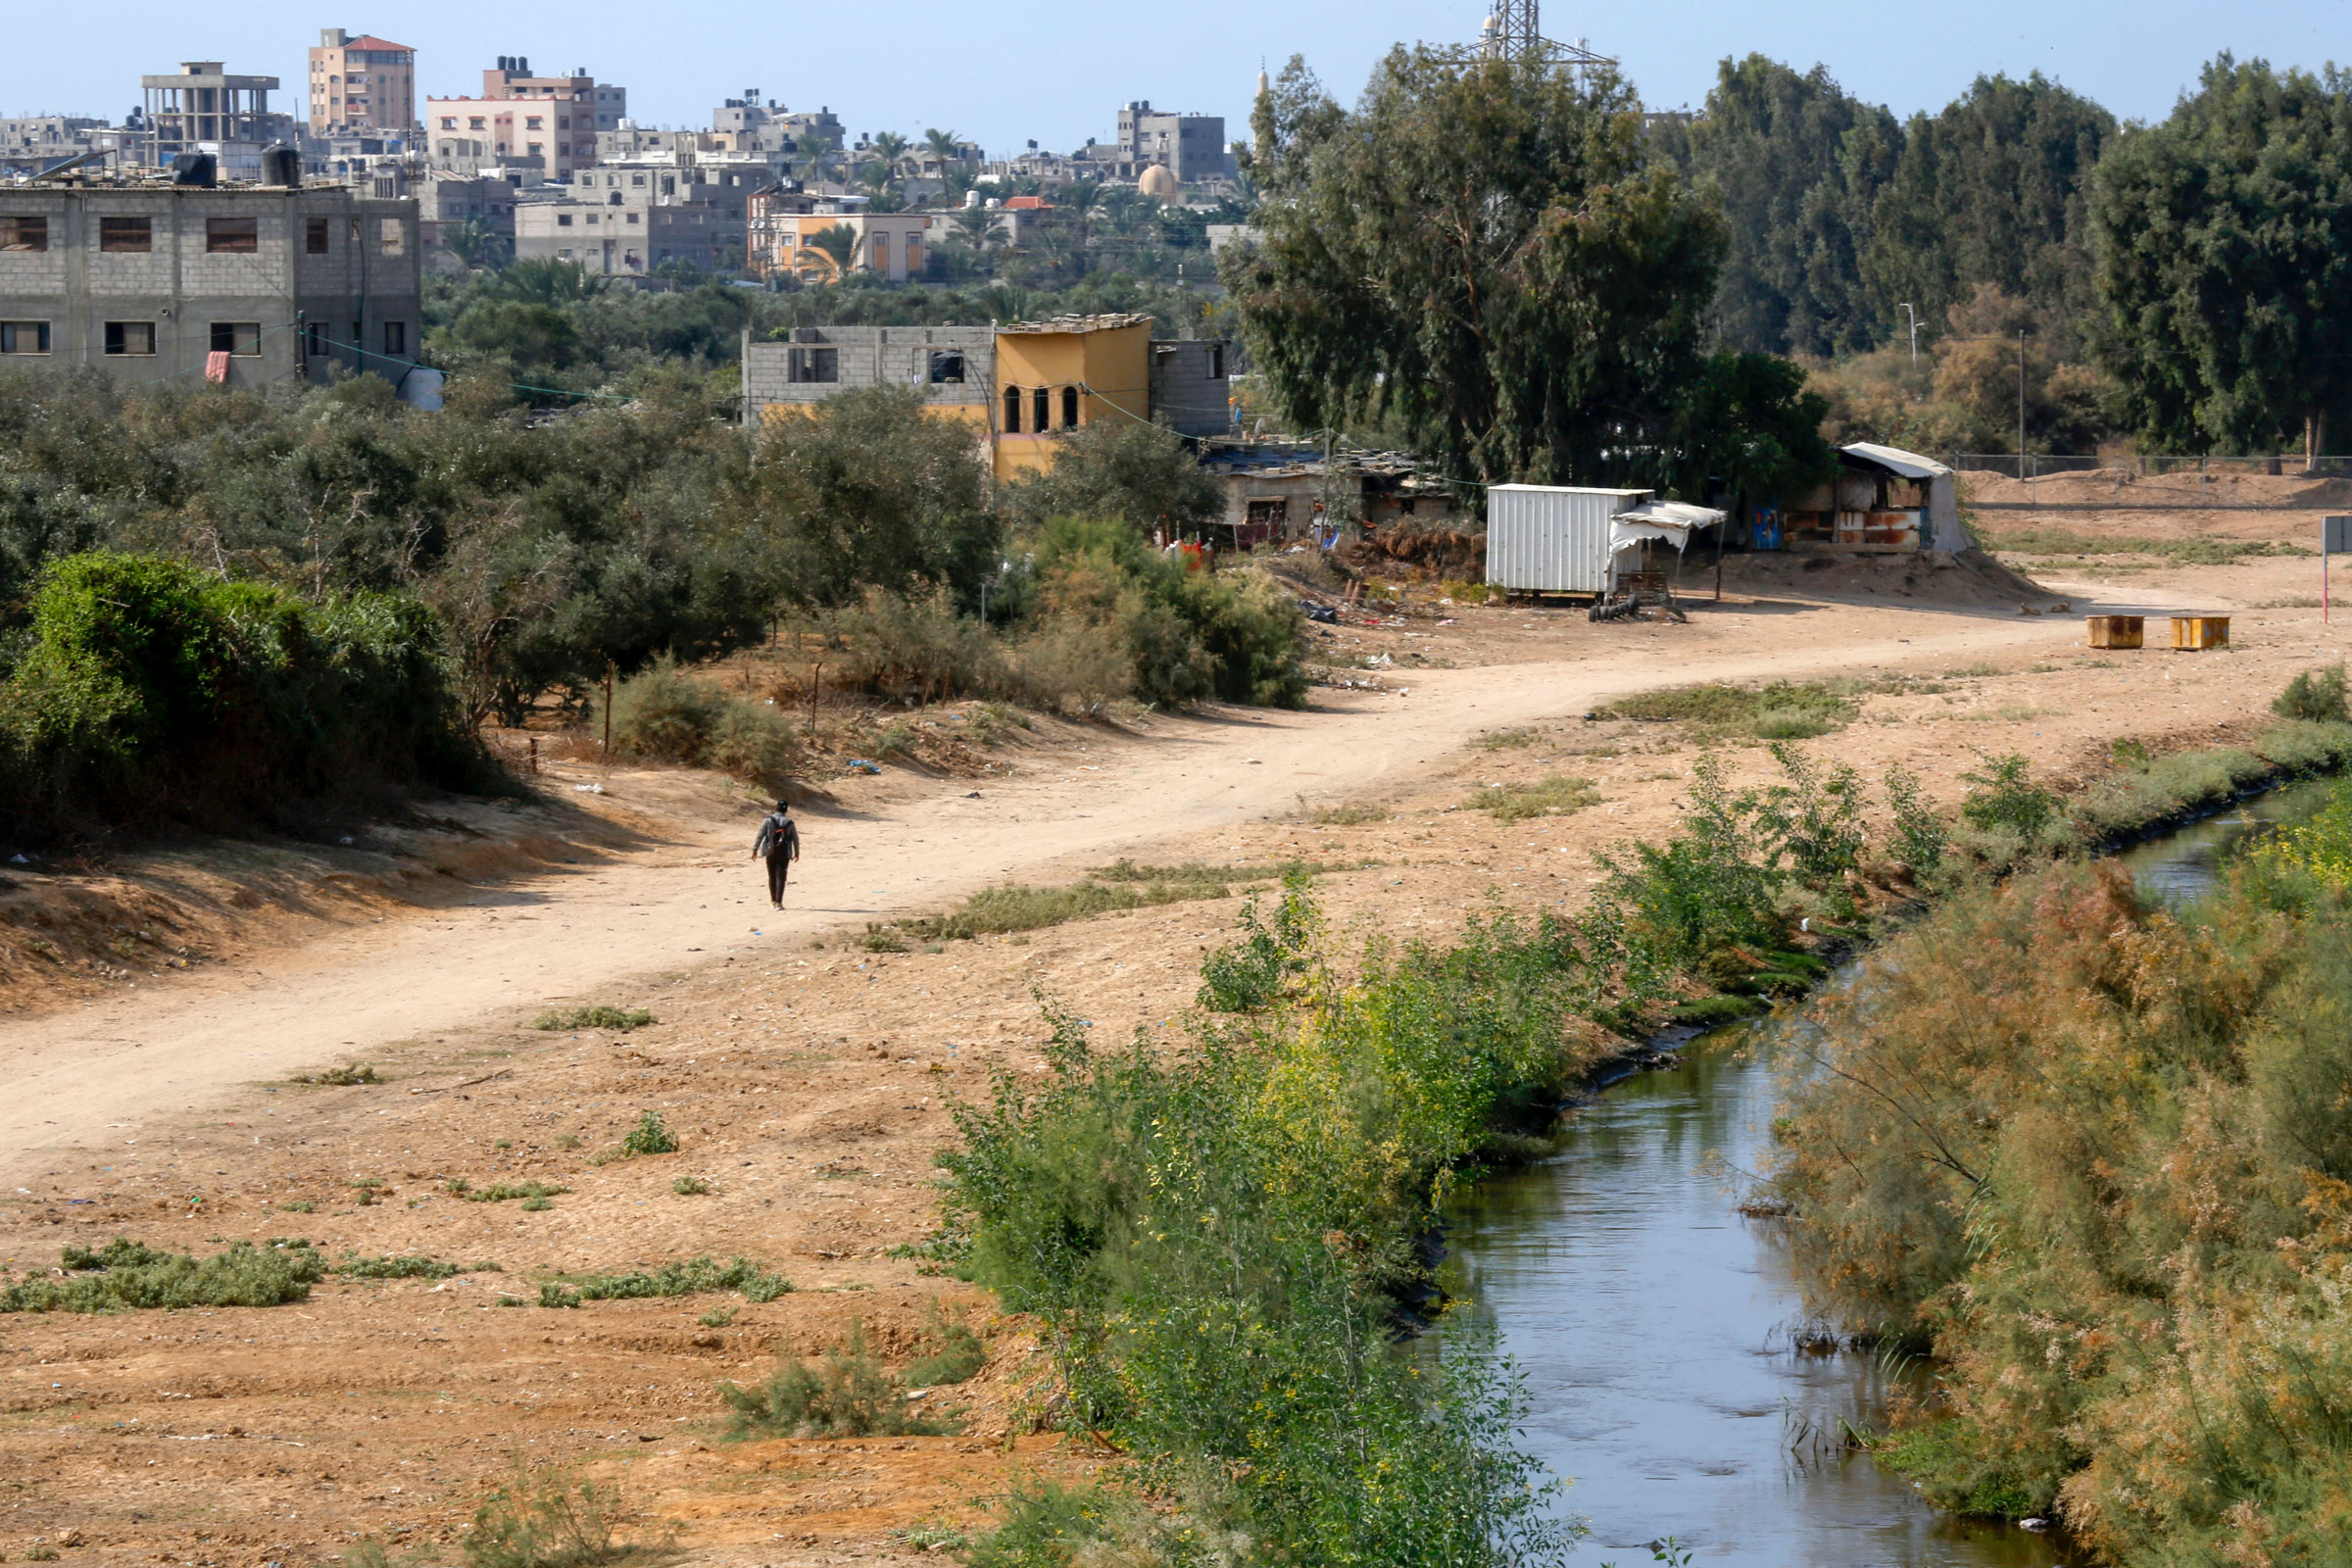 A Palestinian schoolboy stands near a wastewater channel that runs through the Gaza valley in Al-Mograqa village in Gaza on Nov. 6, 2022. (Ahmed Zakot—SOPA Images/LightRocket/Getty Images)